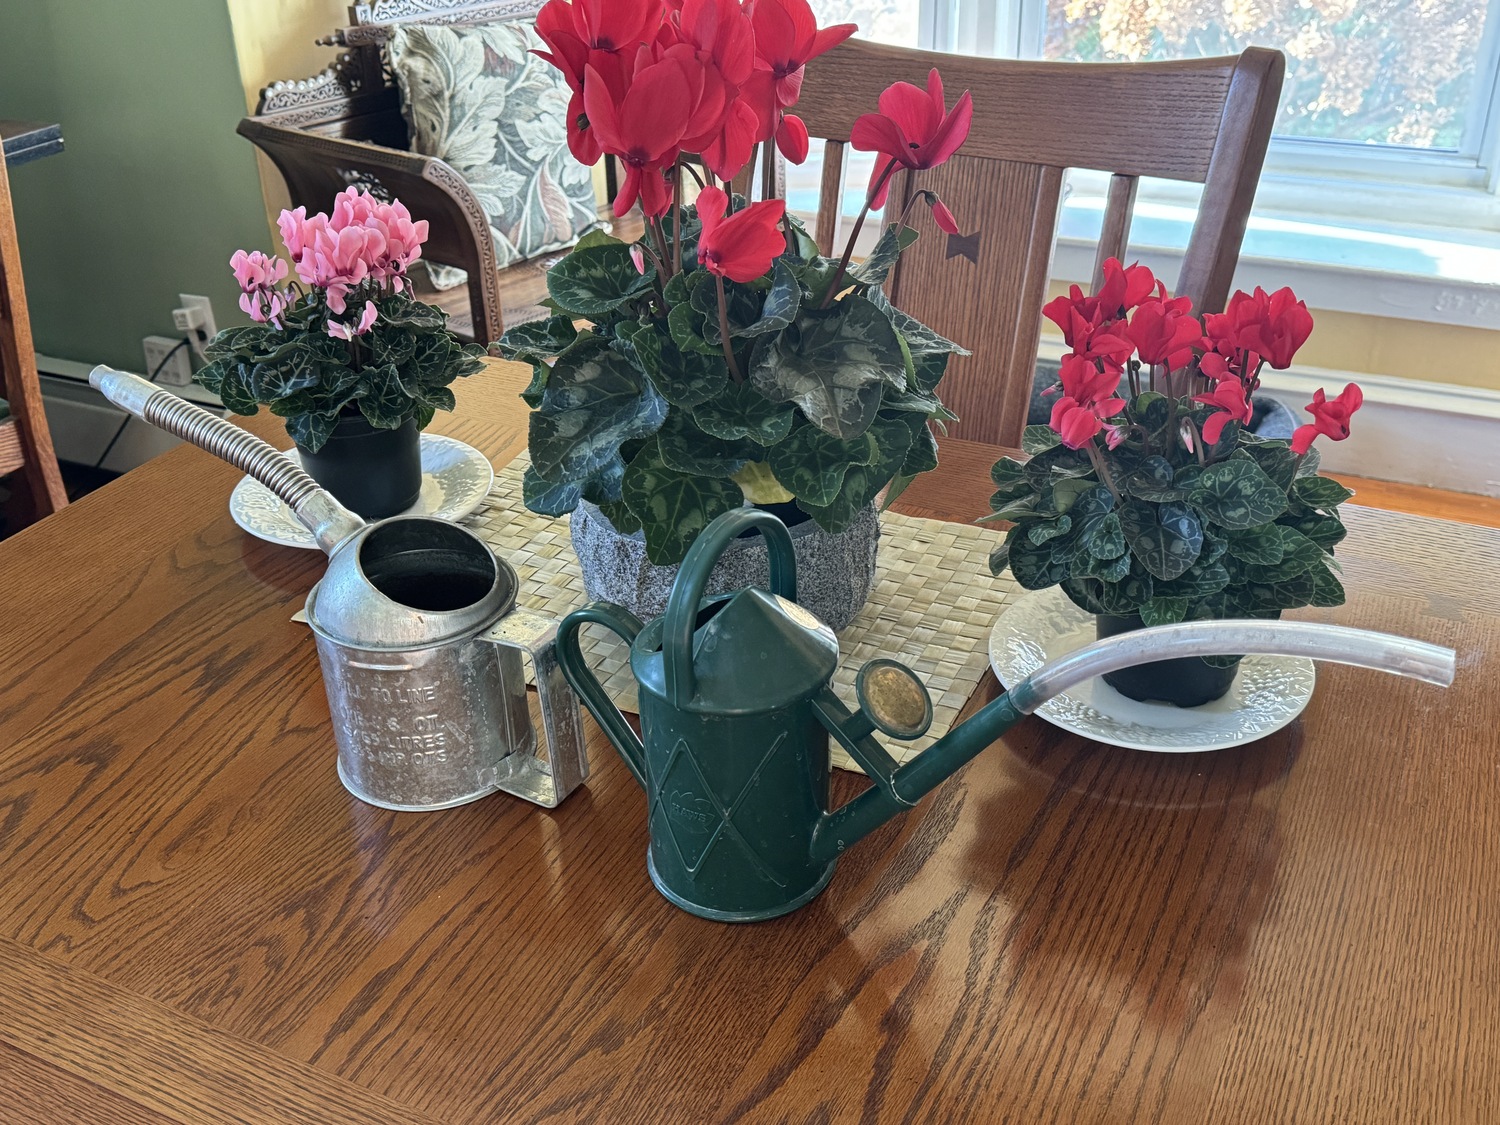 The Haws Bartley Burbler watering can (right) with the rose removed from the spout and a 7-inch length of curved vinyl tubing attached. The tubing allows for watering between the foliage and keeps the water off the foliage and on the soil. On the left is a classic engine oil can (galvanized) with an articulated spout that allows for precise watering with no spilling. ANDREW MESSINGER